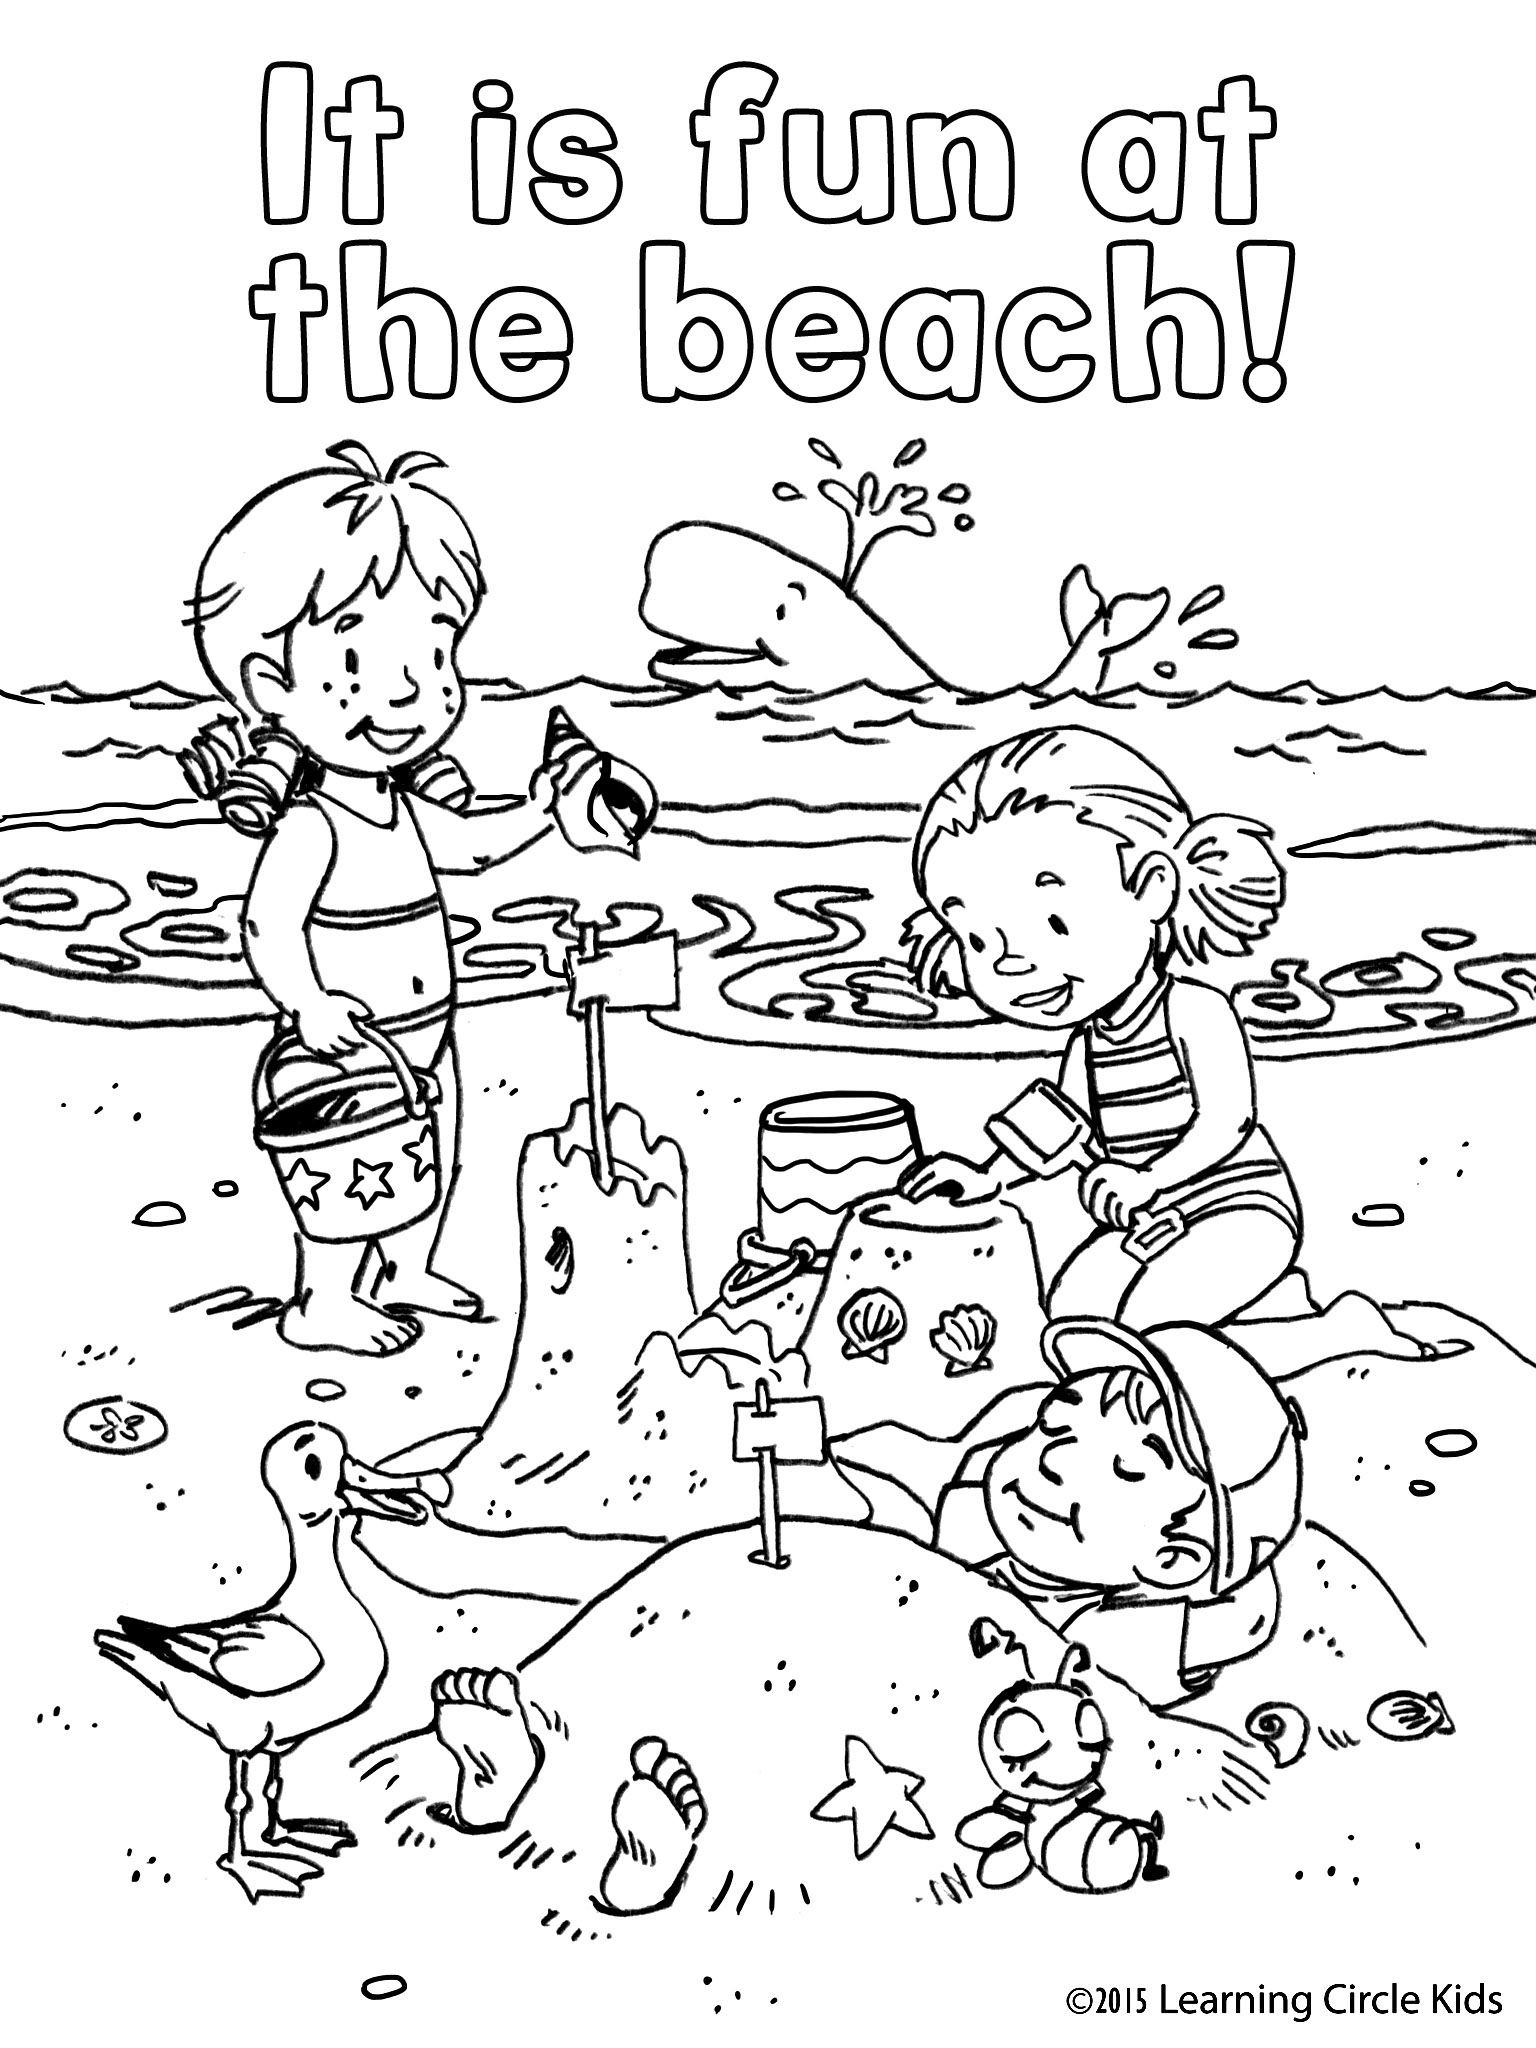 Summer Coloring Pages For Older Kids
 Free coloring page Children s summer fun at the beach